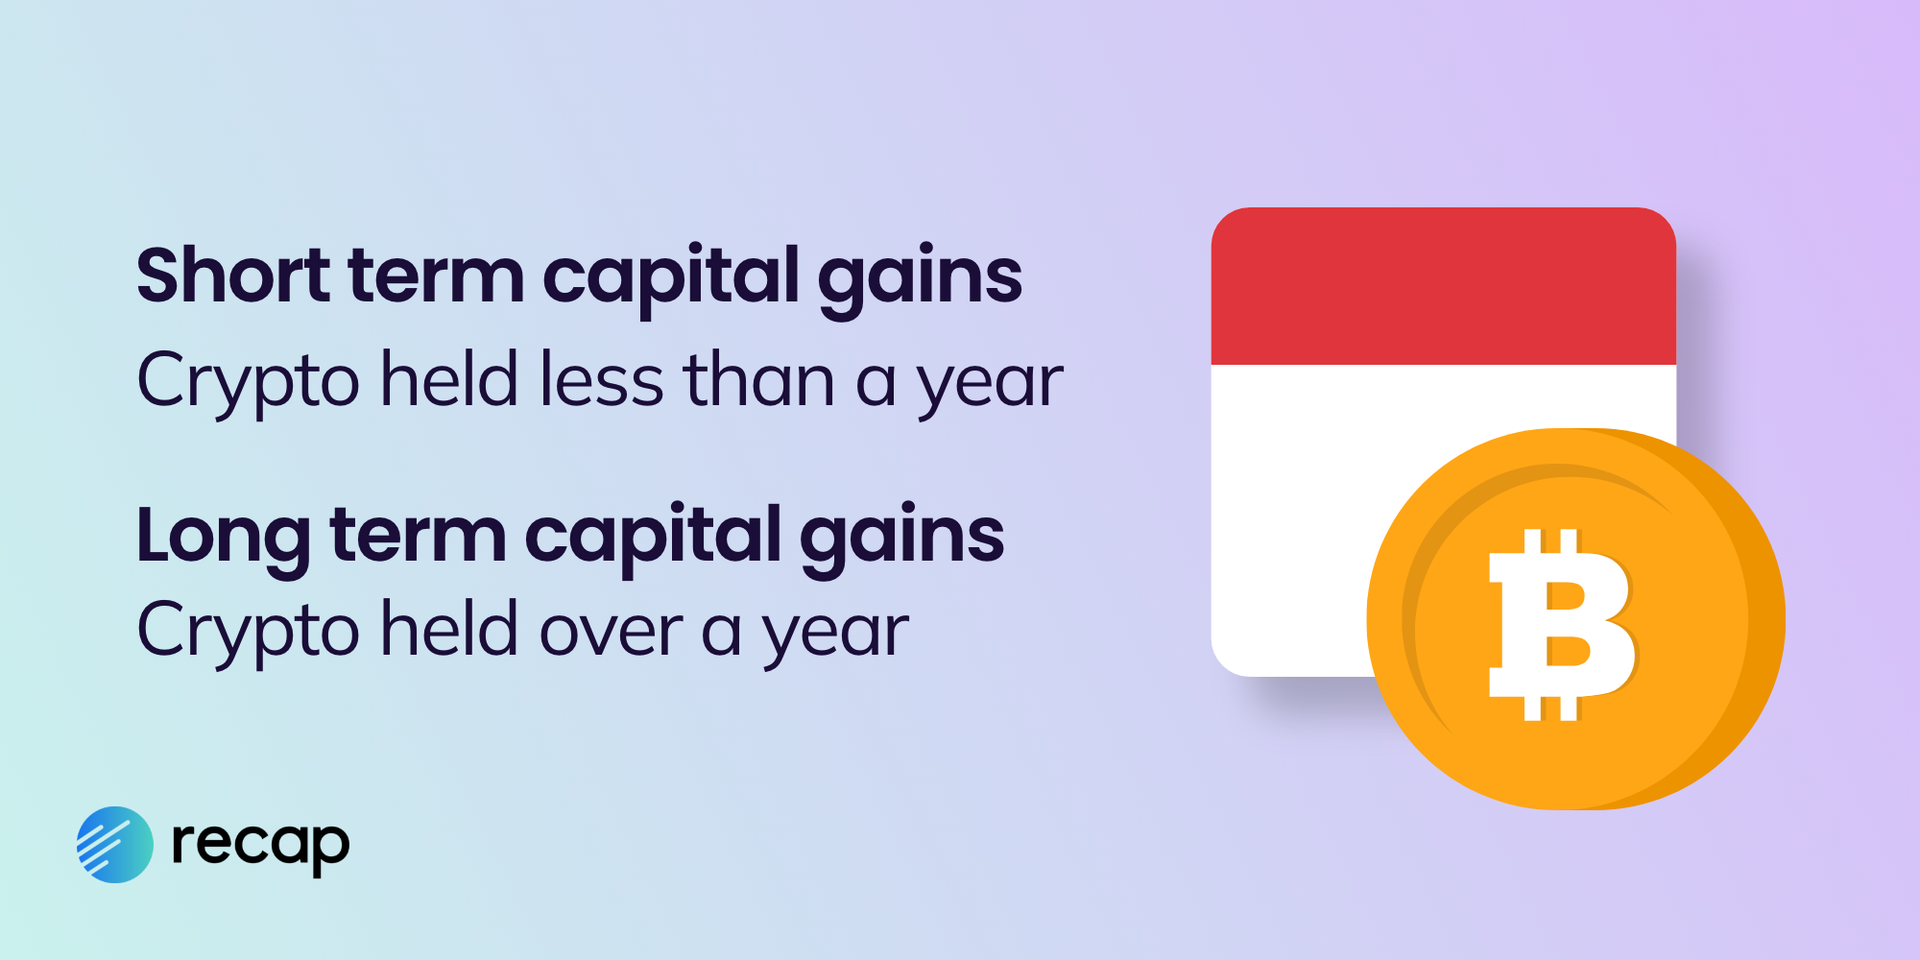 Infographic explaining that short term capital gains are applicable when crypto is held less than a year and long terms gains for crypto held over a year